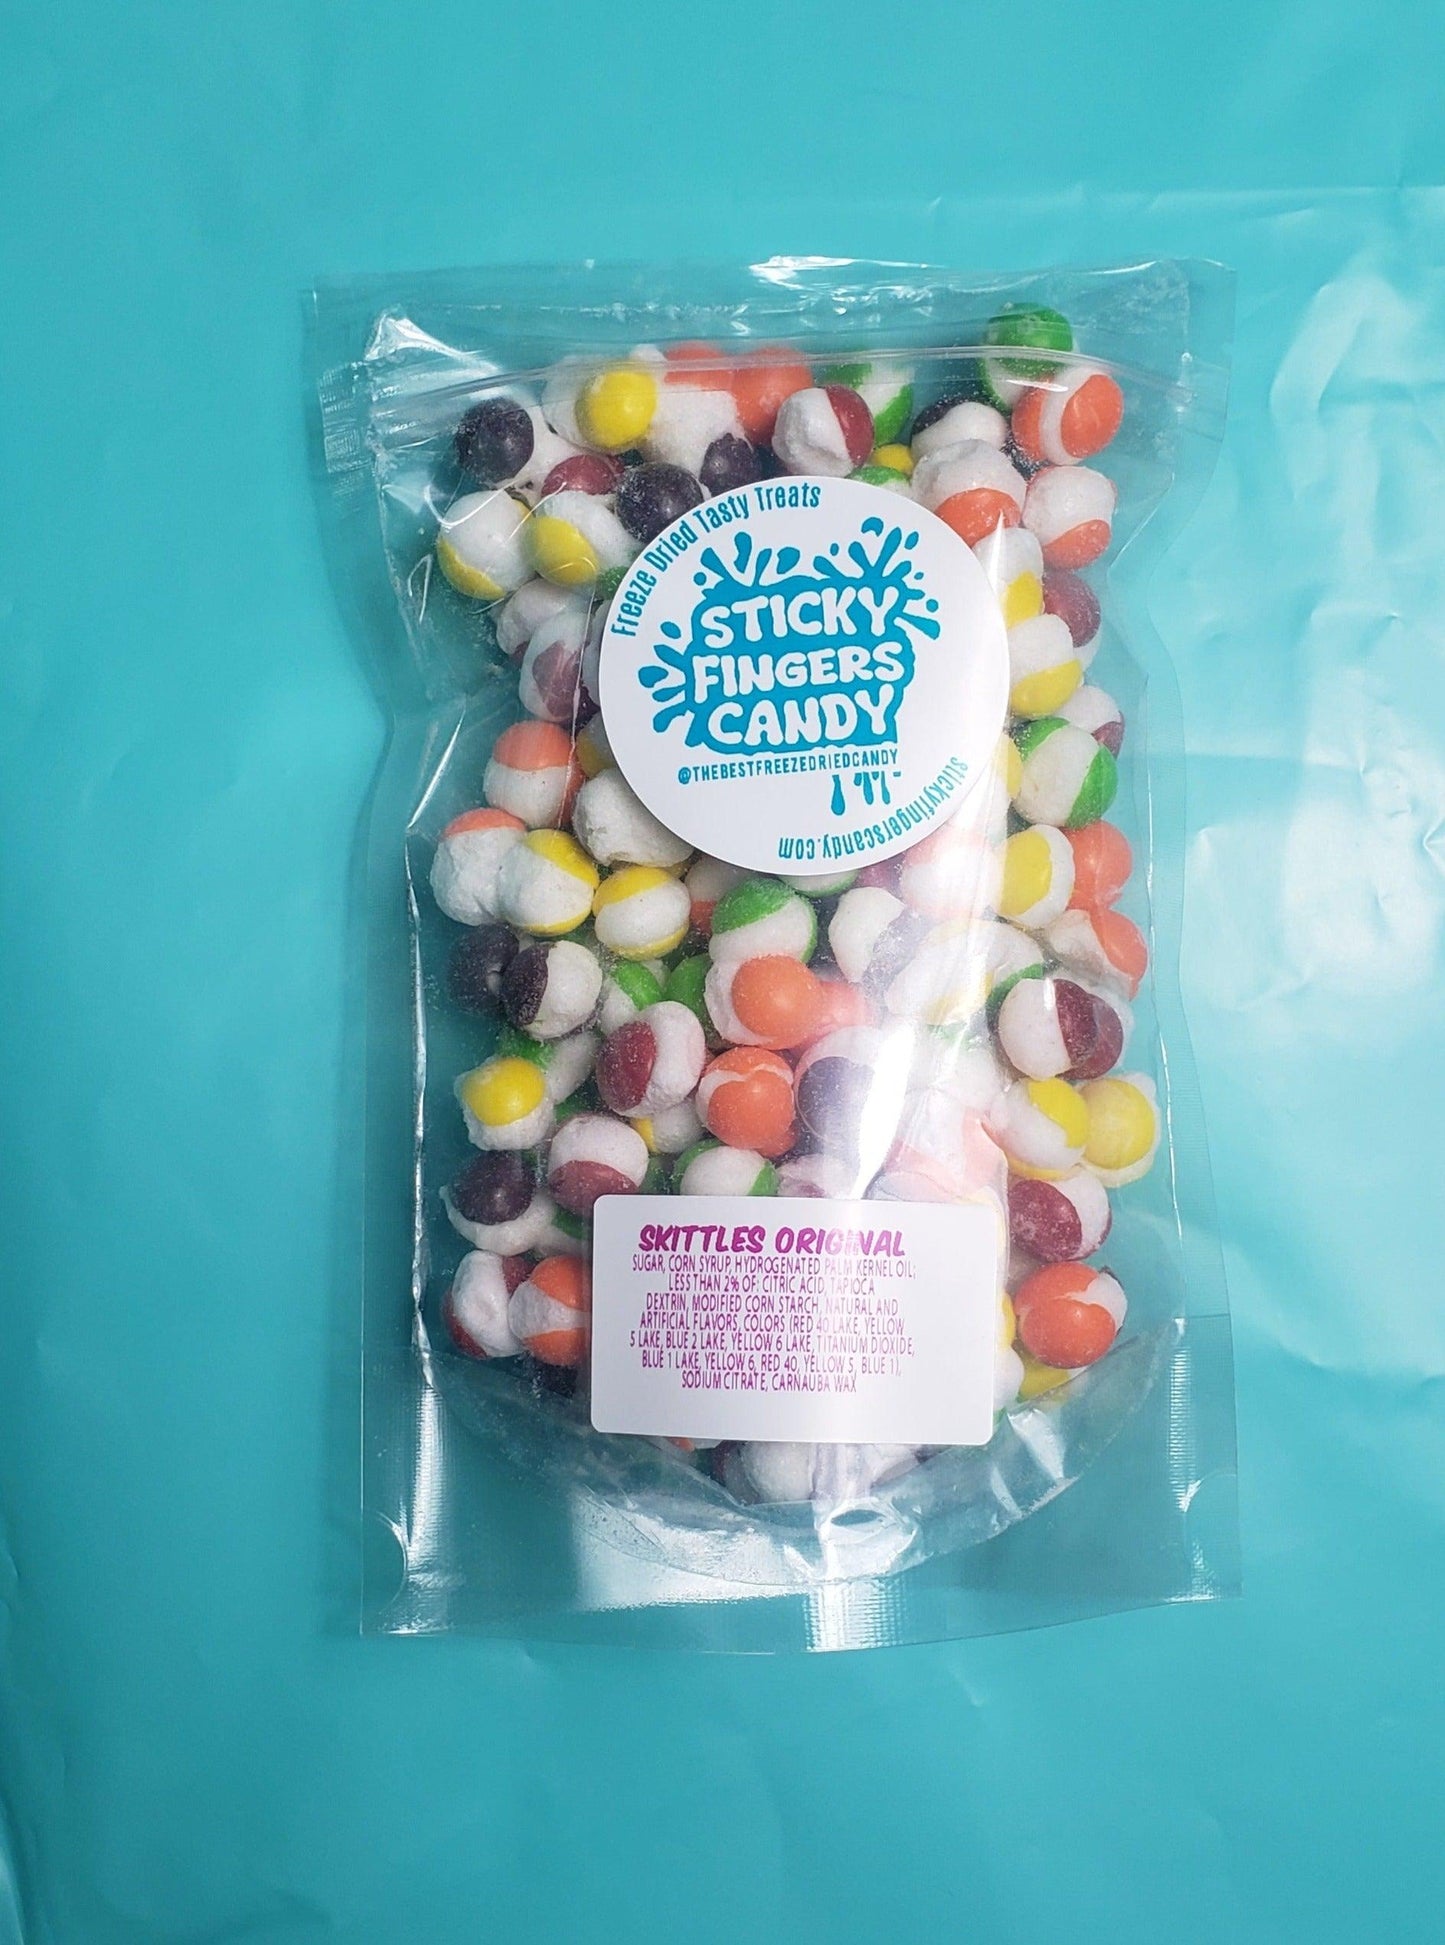 Case Original Freeze Dried Skittles Candy - Sticky Fingers Candy - Freeze Dried Tasty Treats